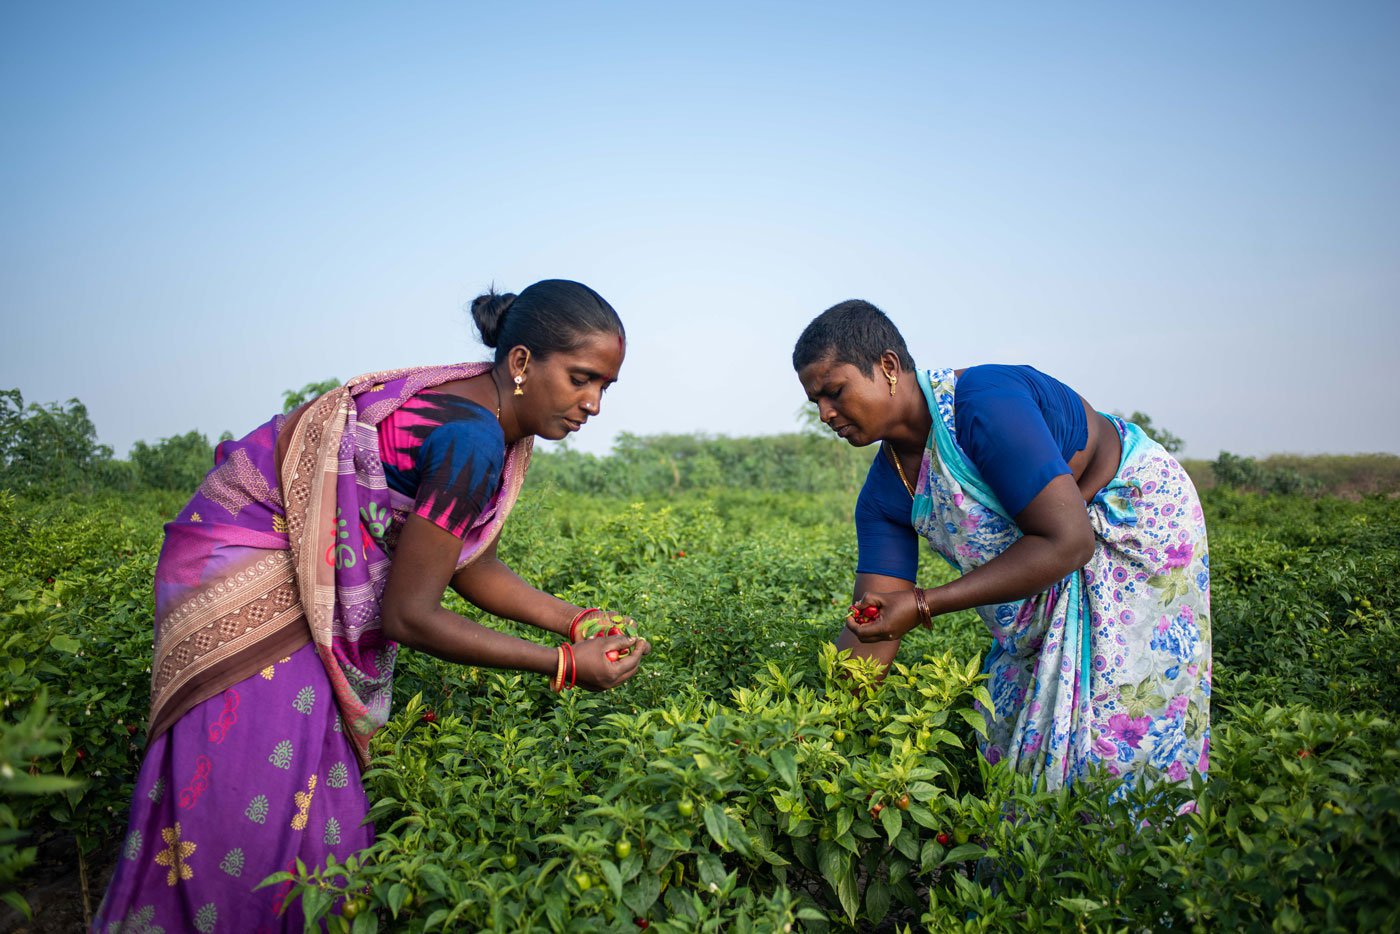 Ambika wearing a purple saree working with Rani in their chilli fields